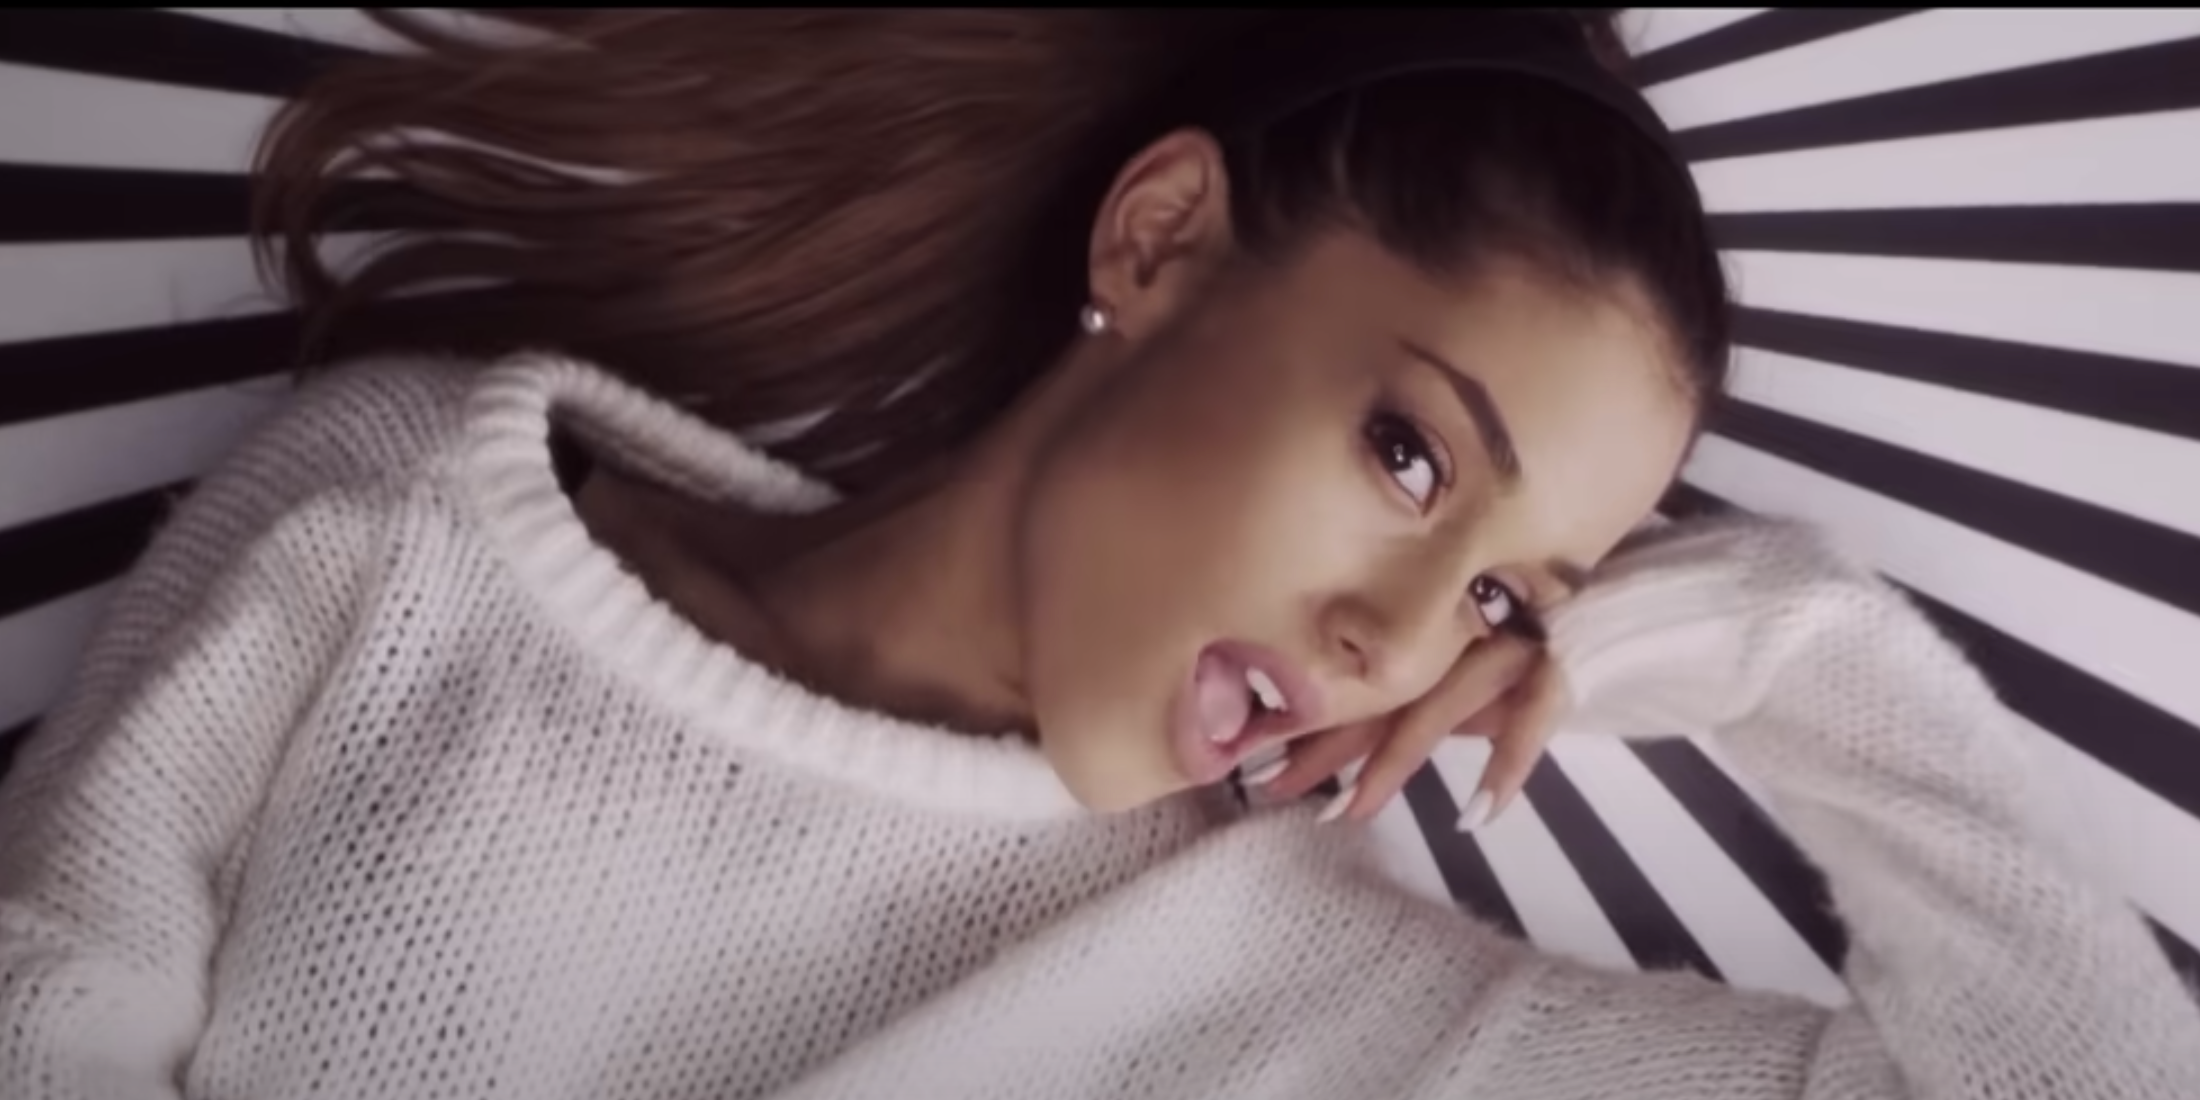 An image of Ariana Grande lounging in the music video for Problem.